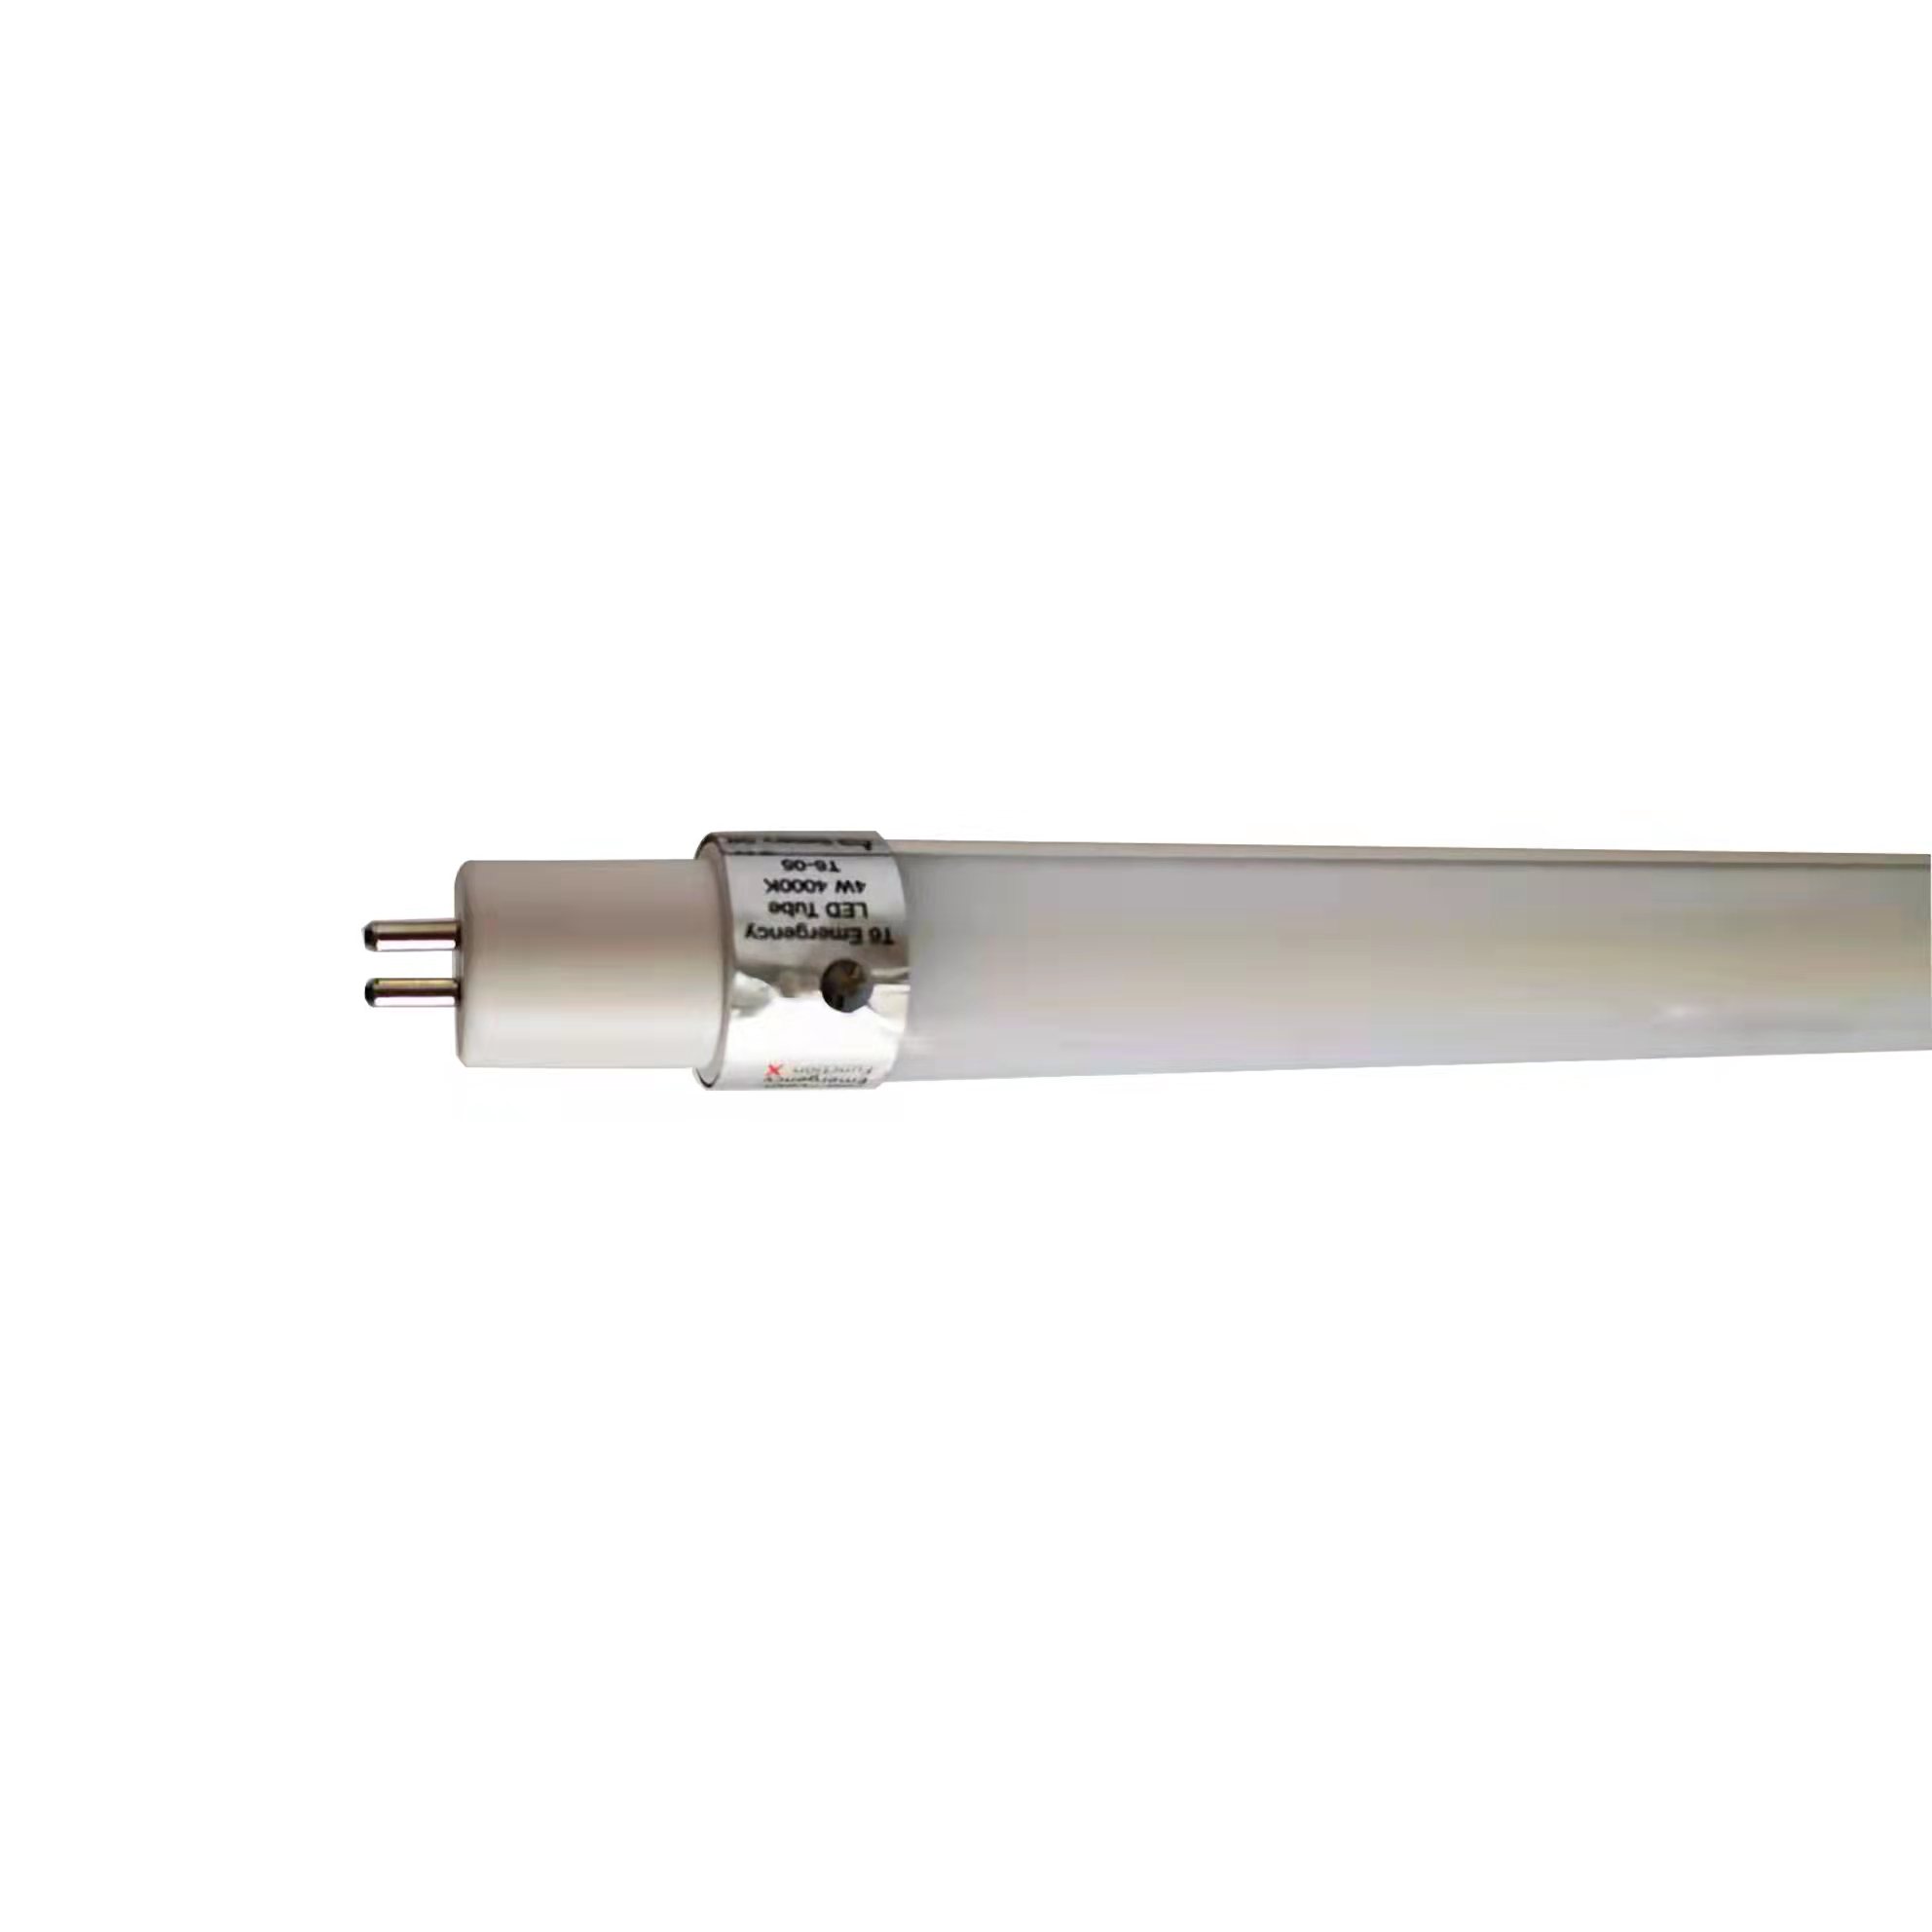 LED tube light T6, 4W 4000K, 30cm, emergency power supply, rechargeable, remote control